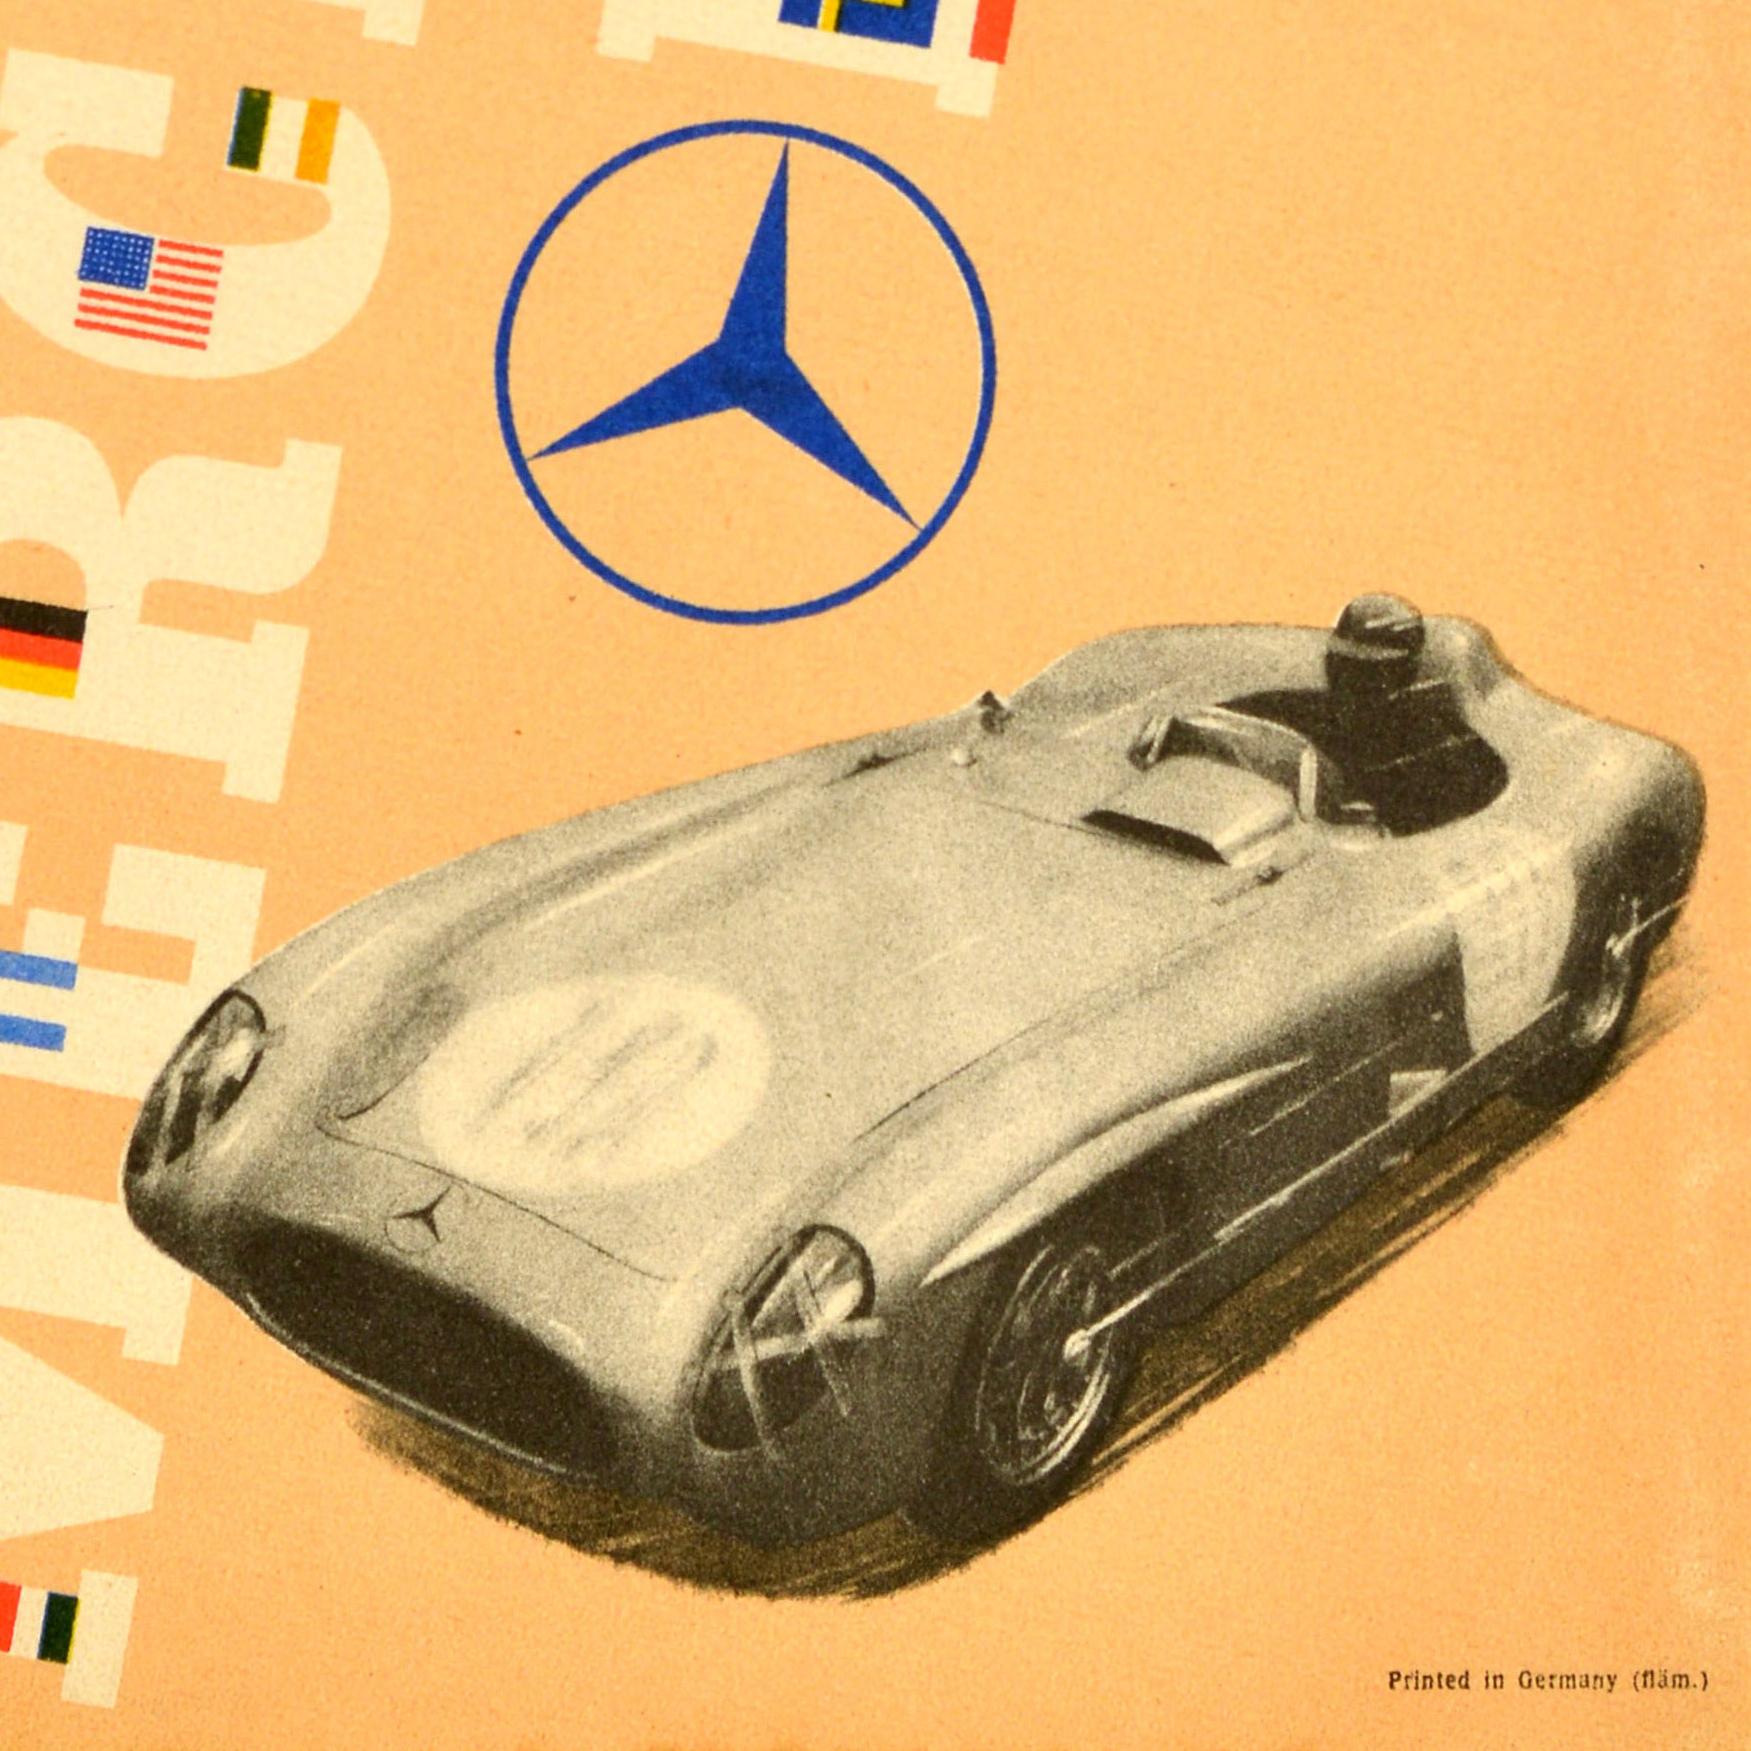 Original vintage car racing poster issued by Mercedes Benz to commemorate their triple victory at the Tourist Trophy Irland / Ireland races in 1955 with a list of the winners: Drievoudige Victorie van de Rensportwagens Racing sports cars (300SLR) 1.